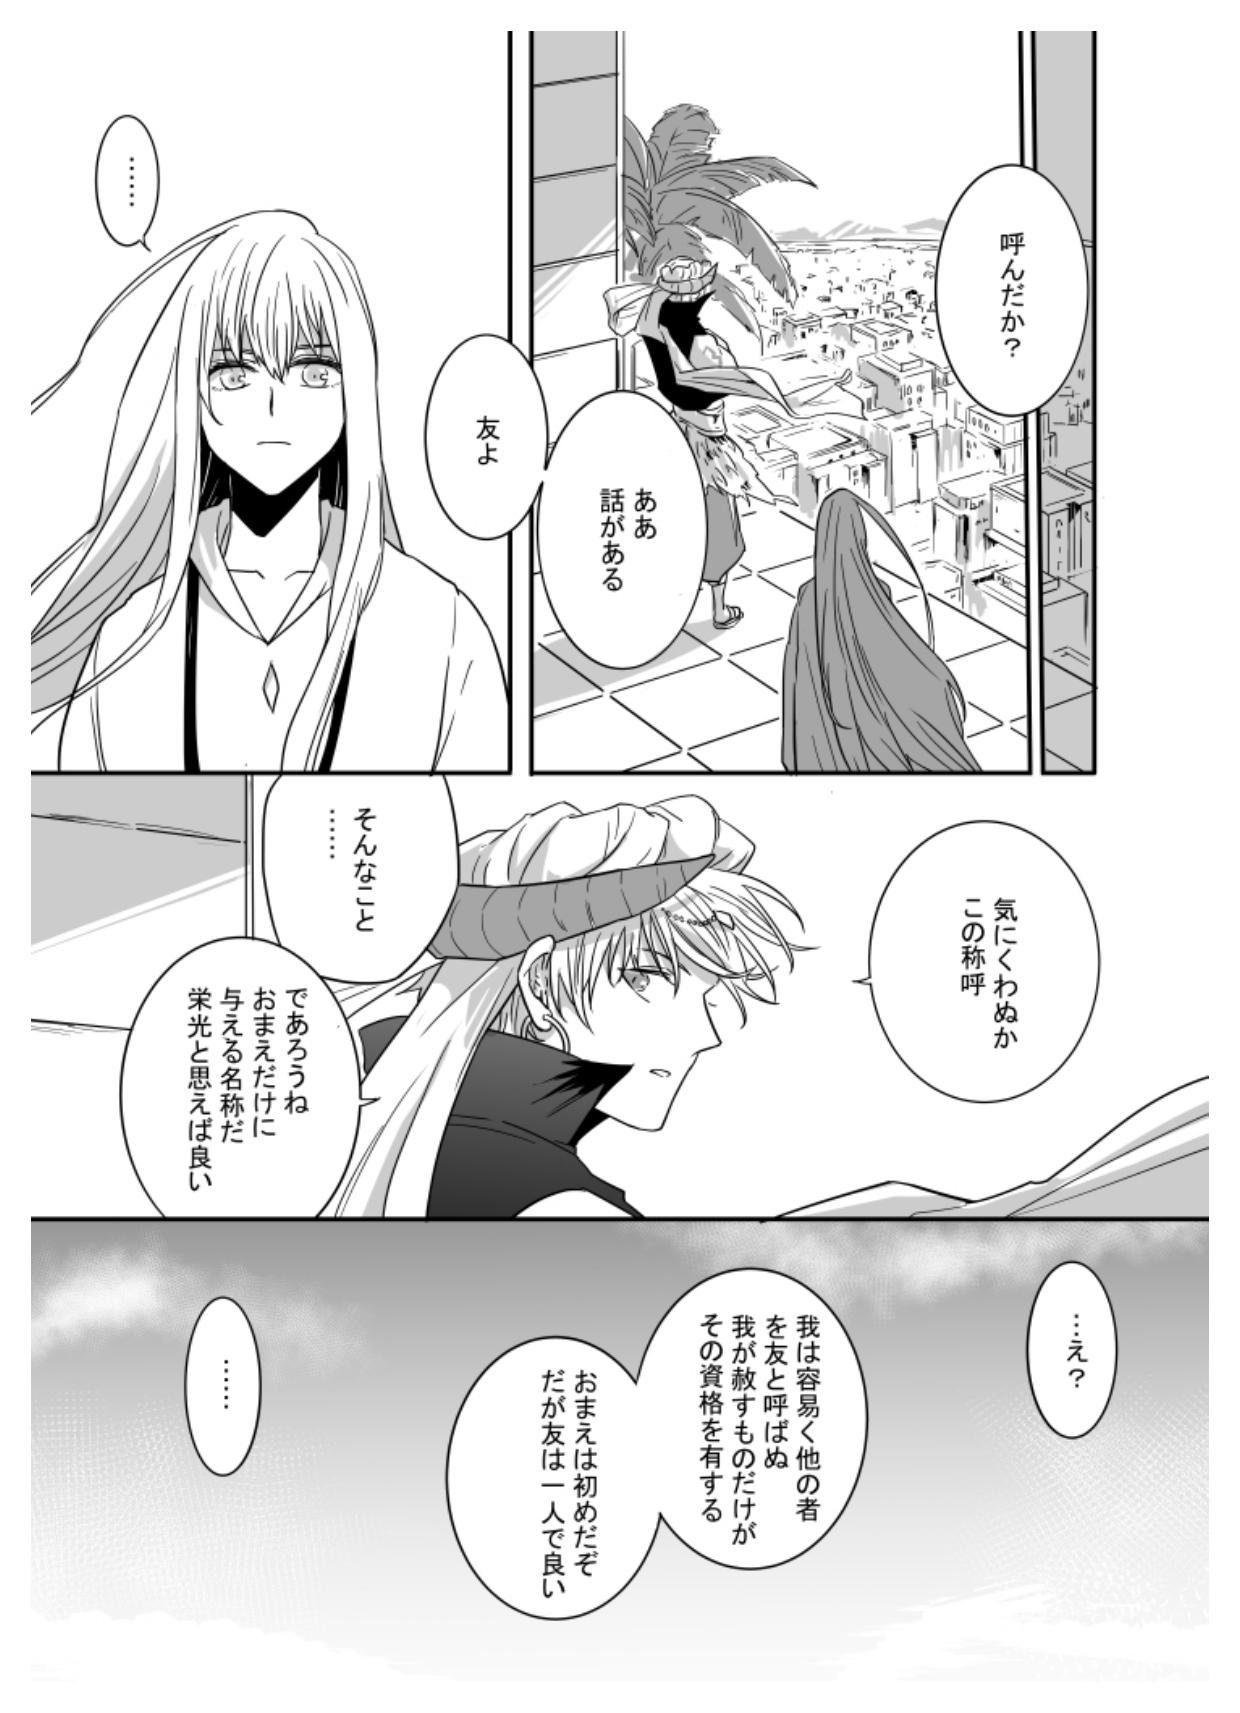 Piercings If I have soul - Fate grand order Real Couple - Page 11